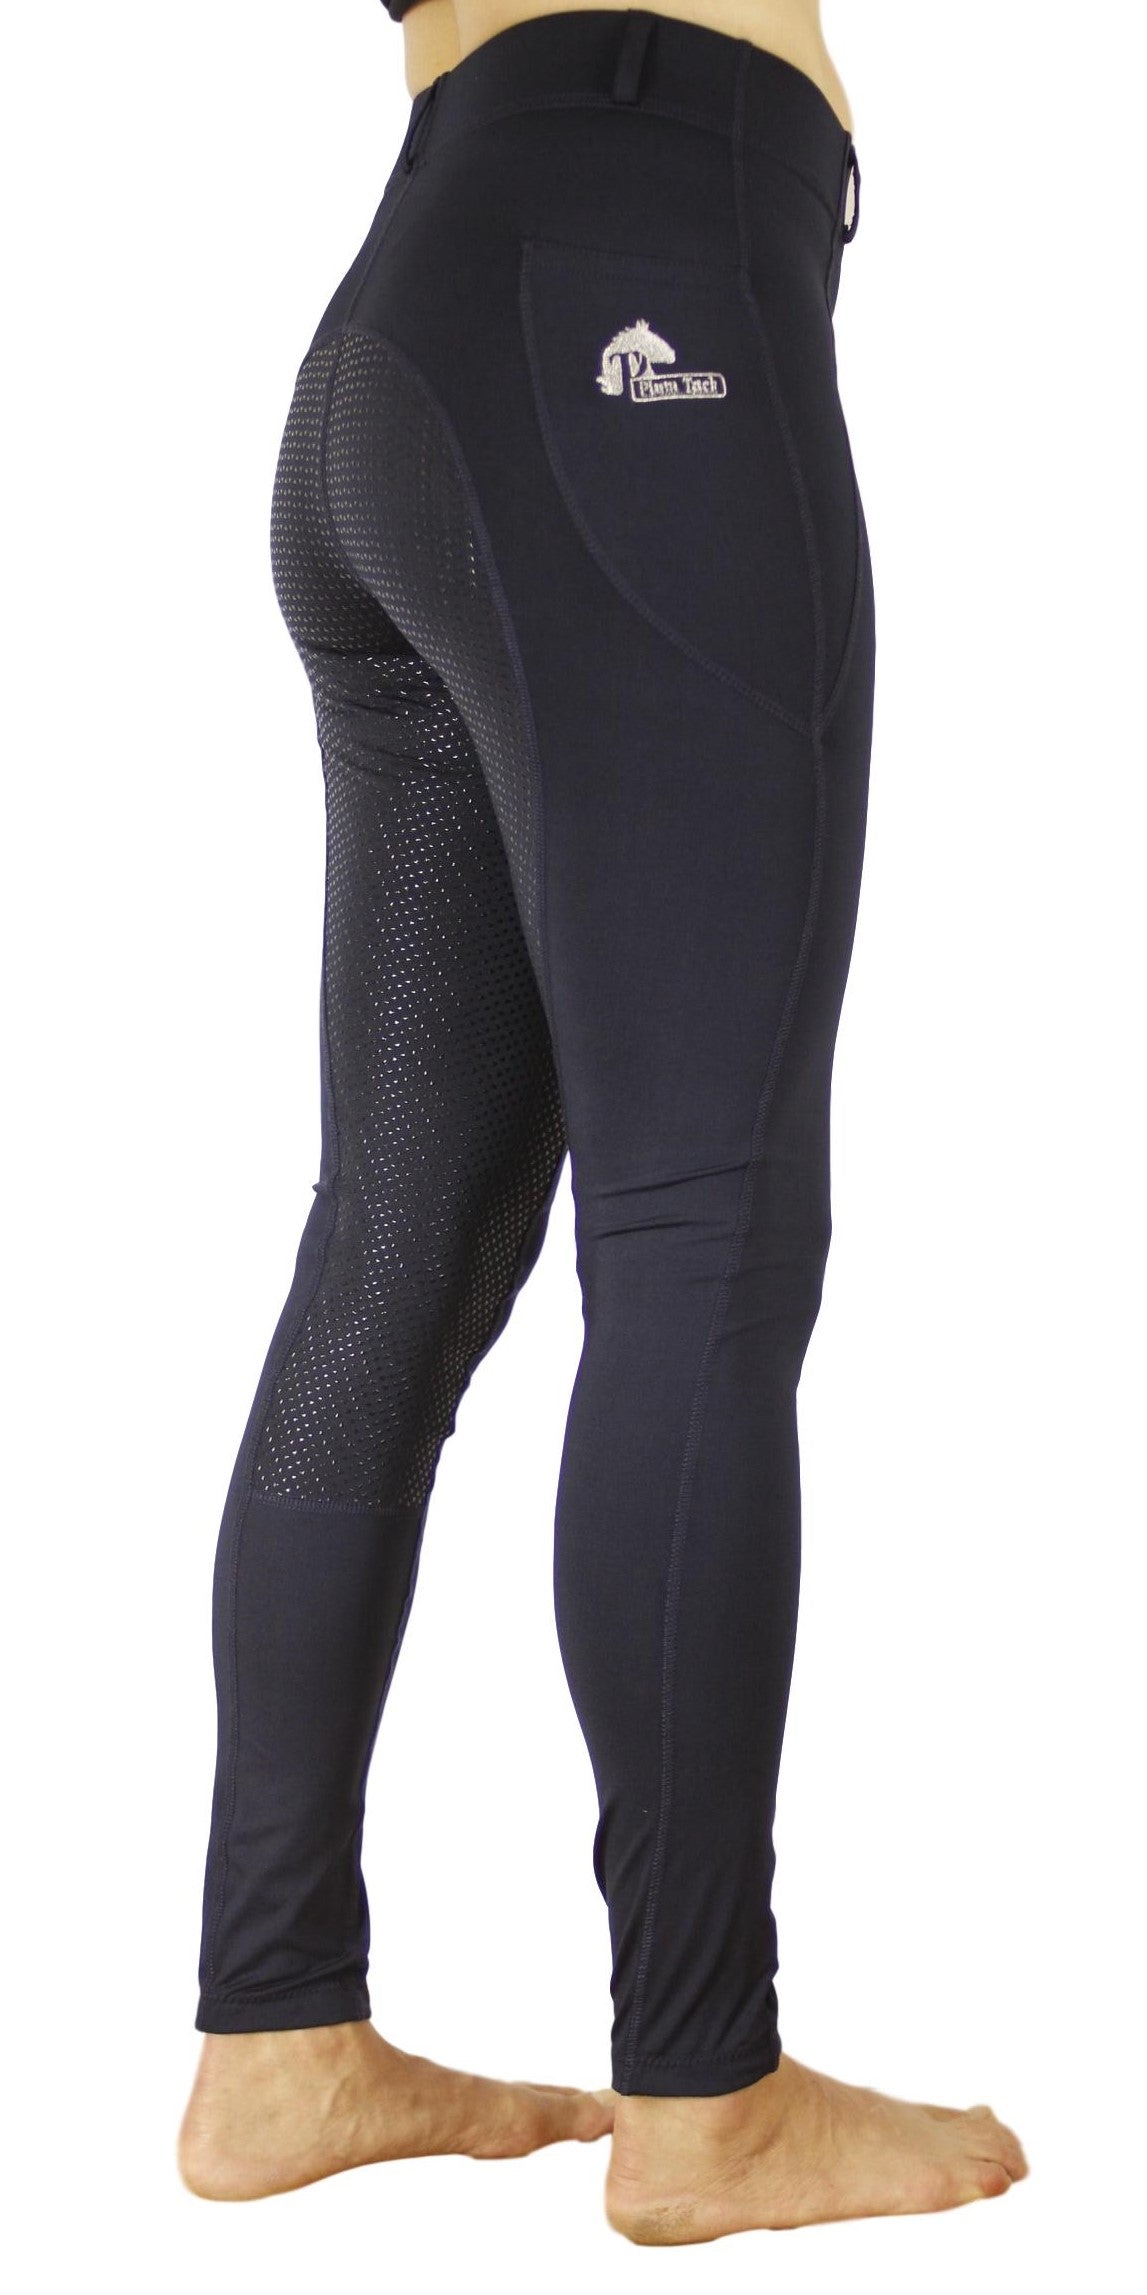 Person wearing navy blue horse riding tights with mesh panels.